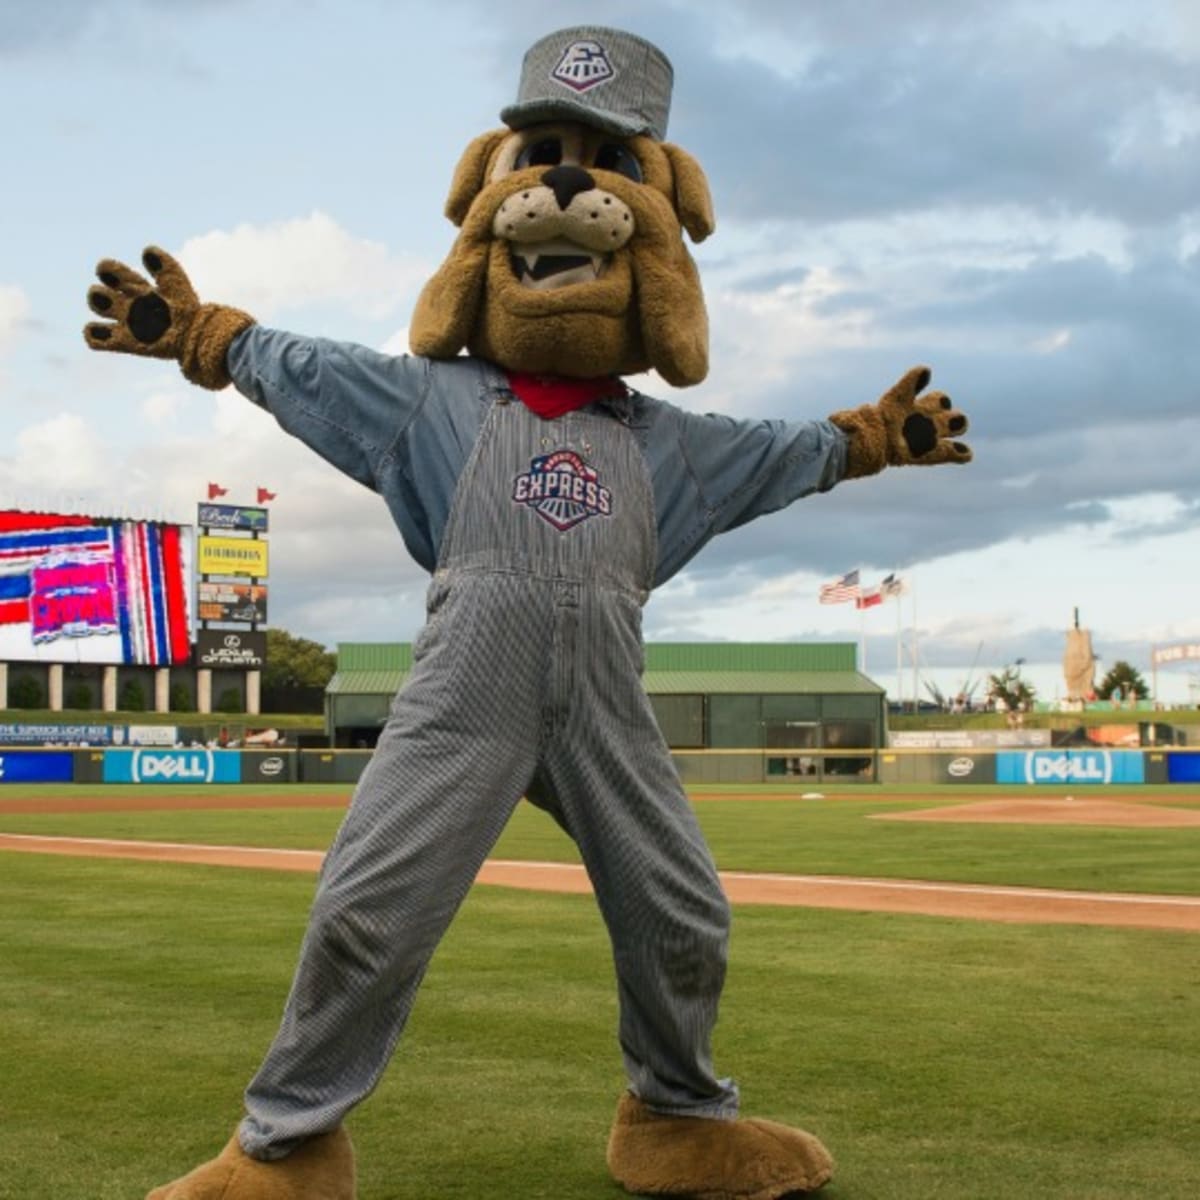 Minors Madness, the quest for the top team name in MiLB: The